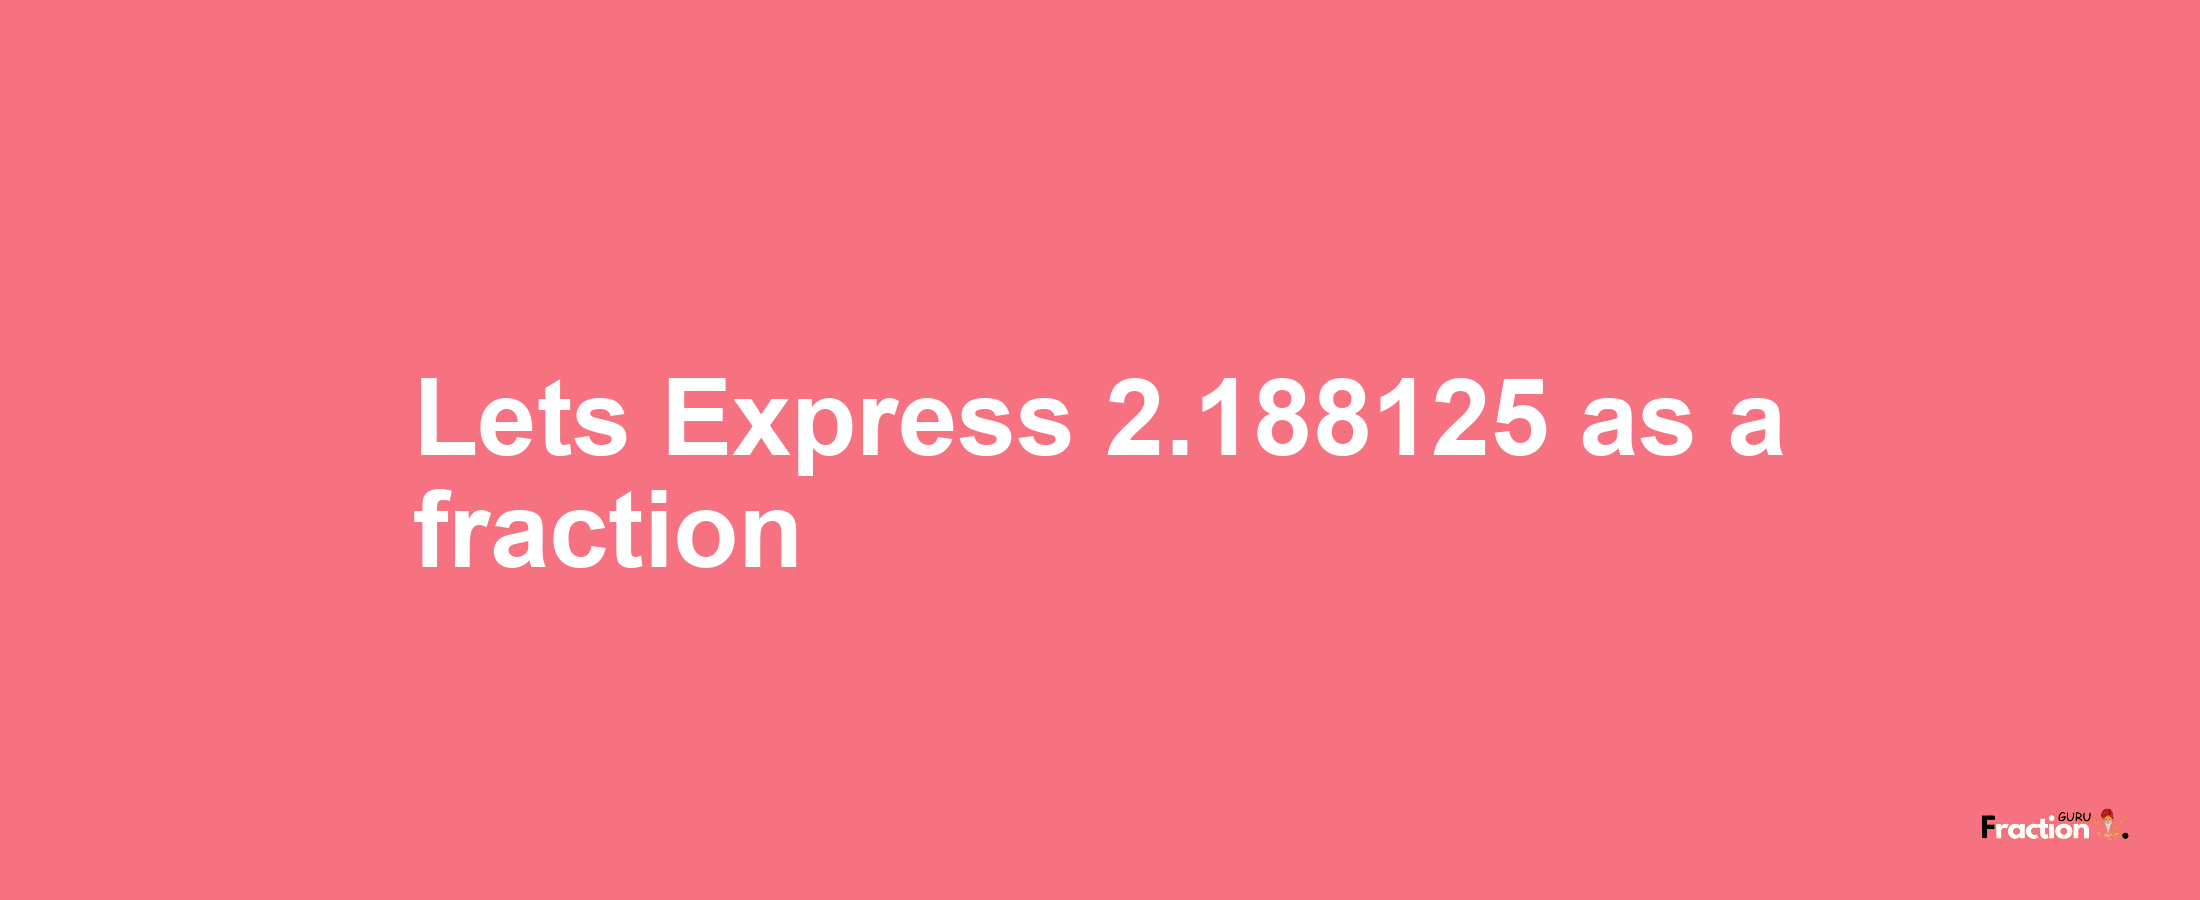 Lets Express 2.188125 as afraction